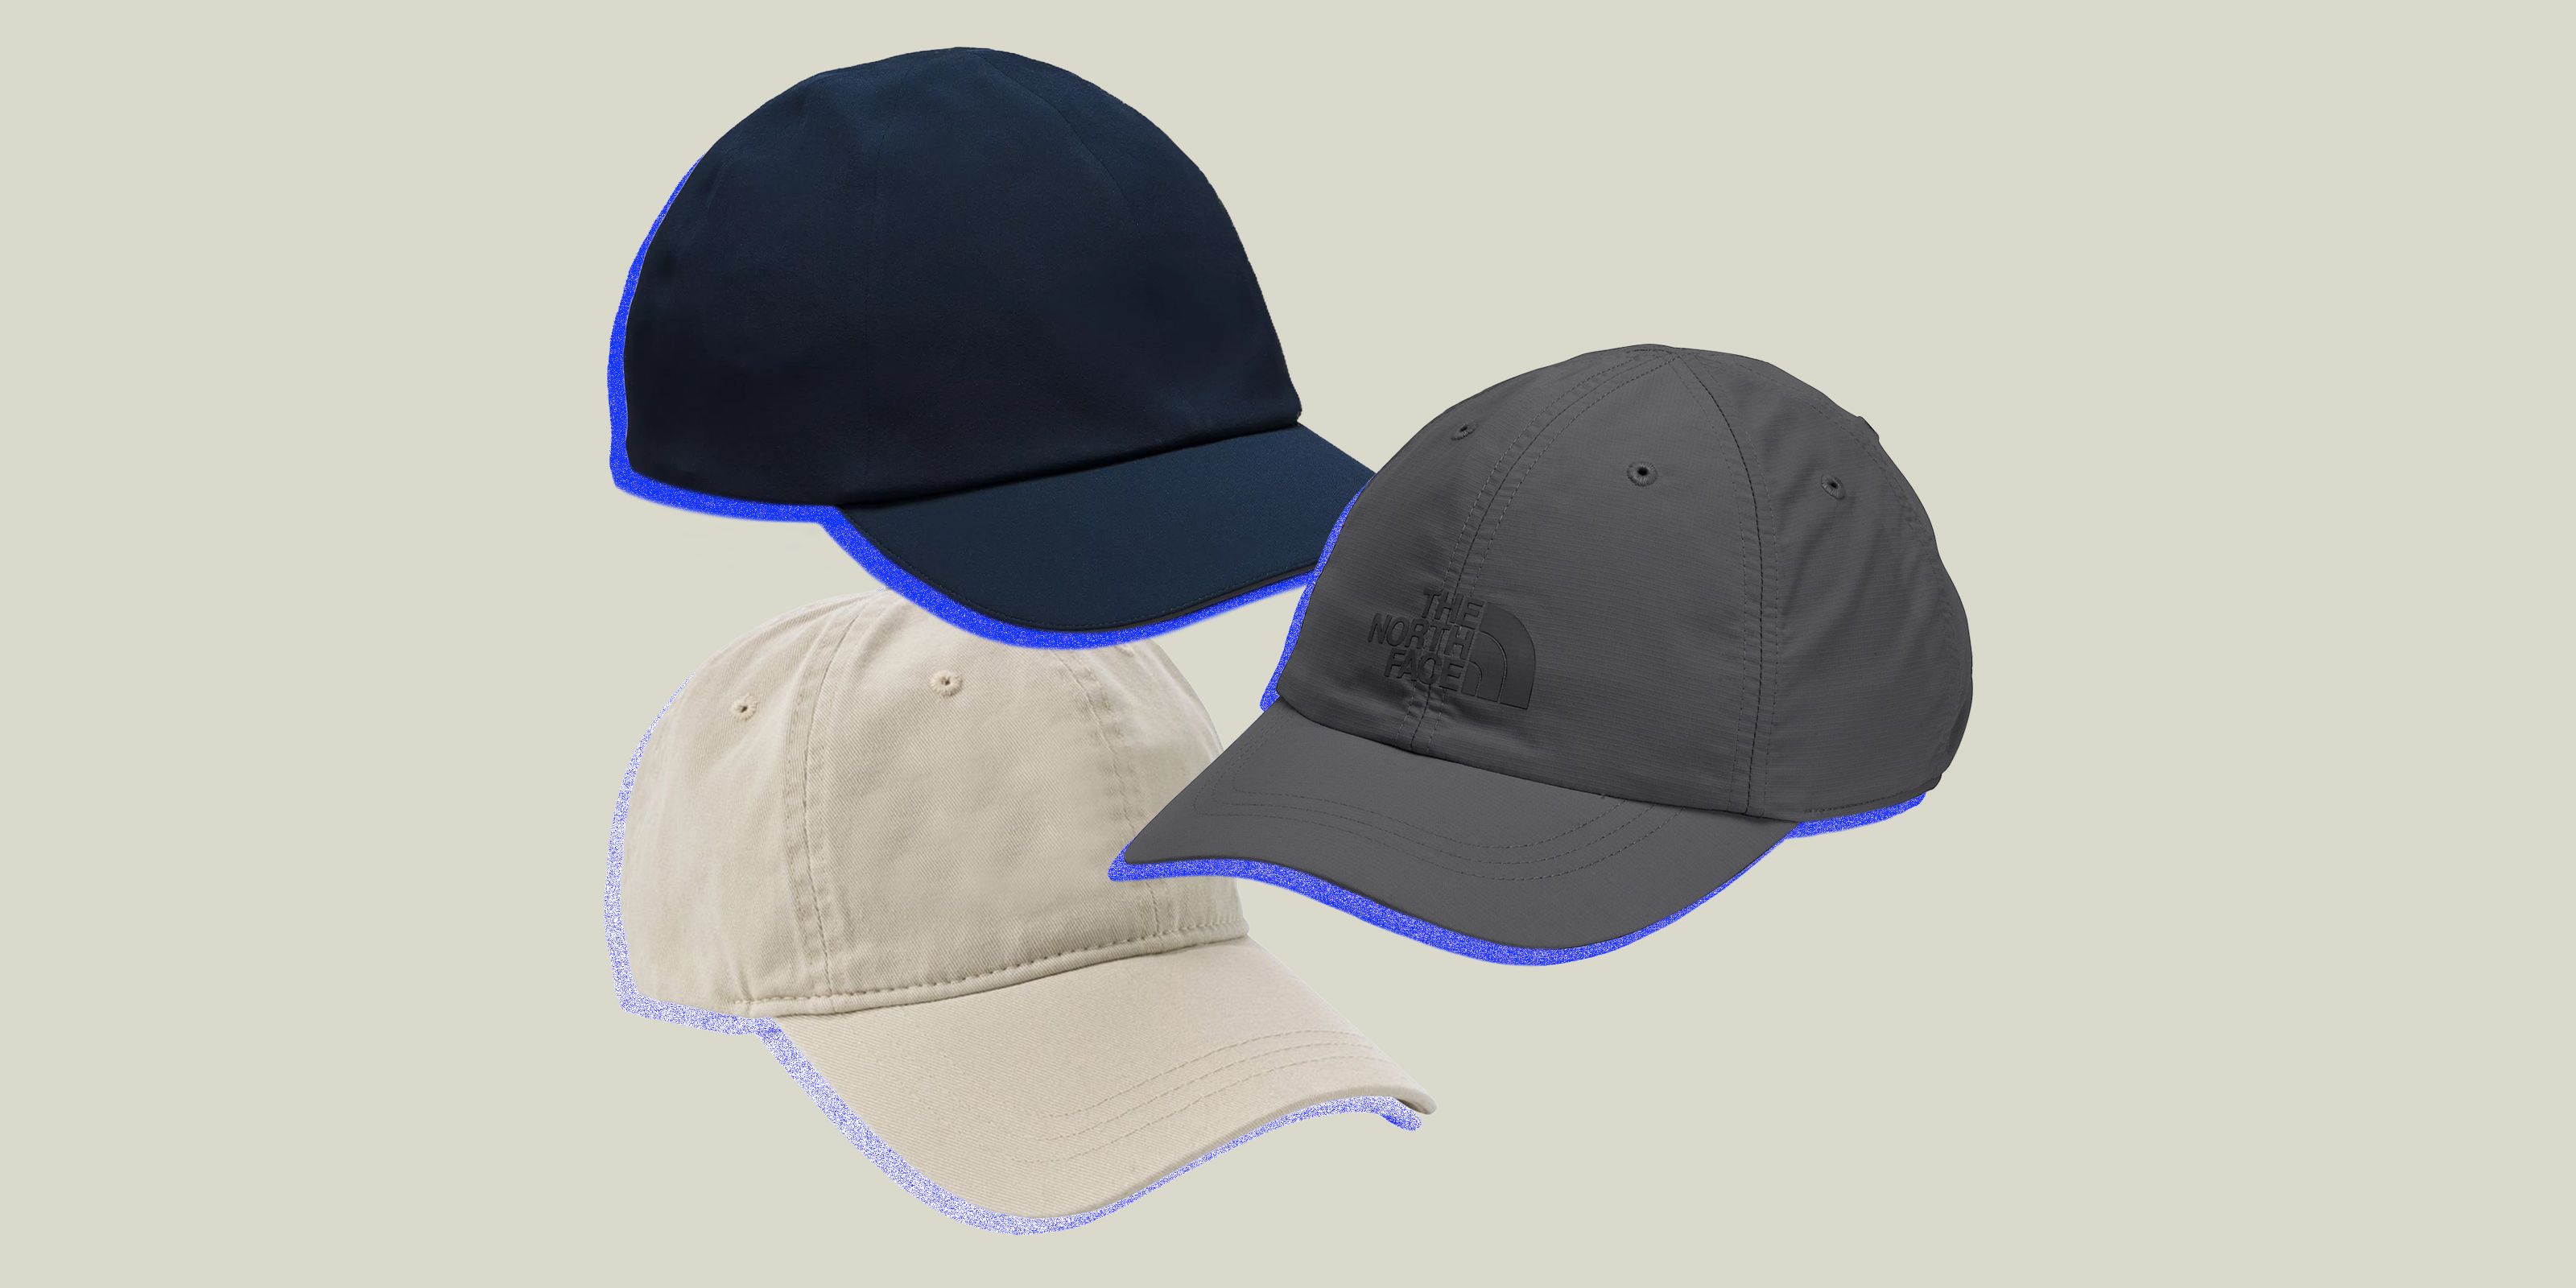 The 12 Coolest Baseball Caps for Keeping the Sun Out of Your Eyes